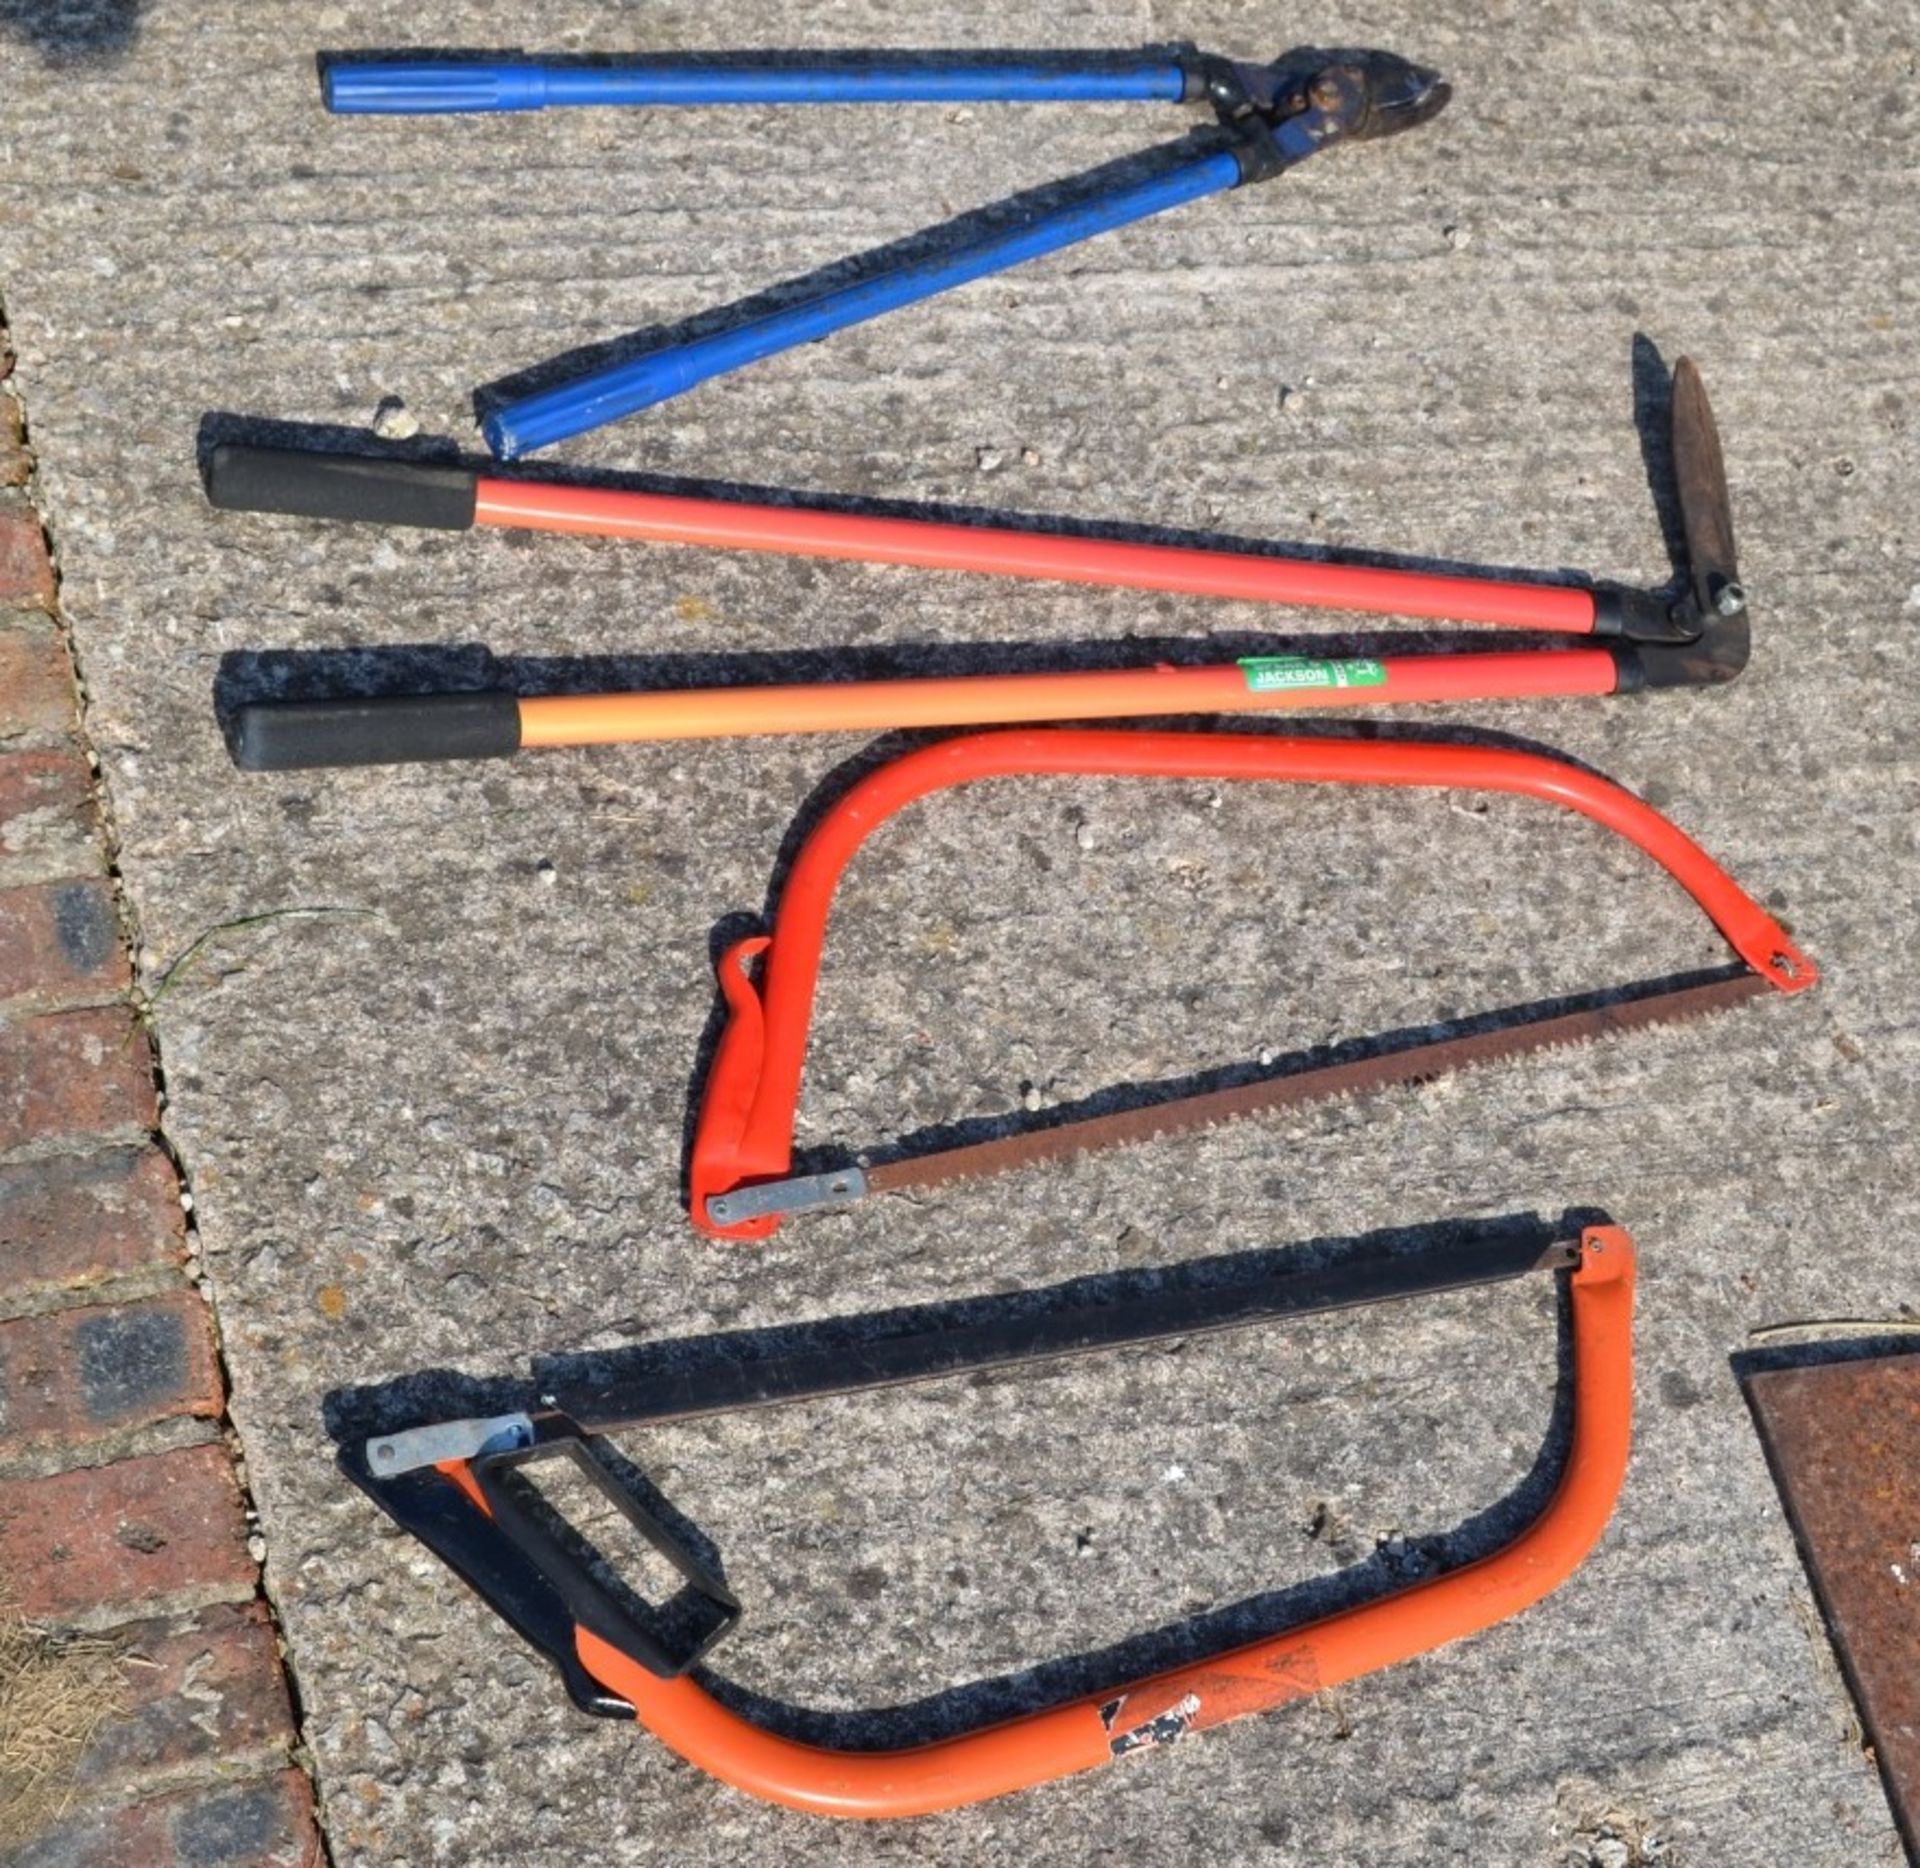 4 x Assorted Tools - Includes 2 x Saws, 1 x Hedge Trimmer, 1 x Long Handle Pruner - All Around - Image 2 of 2